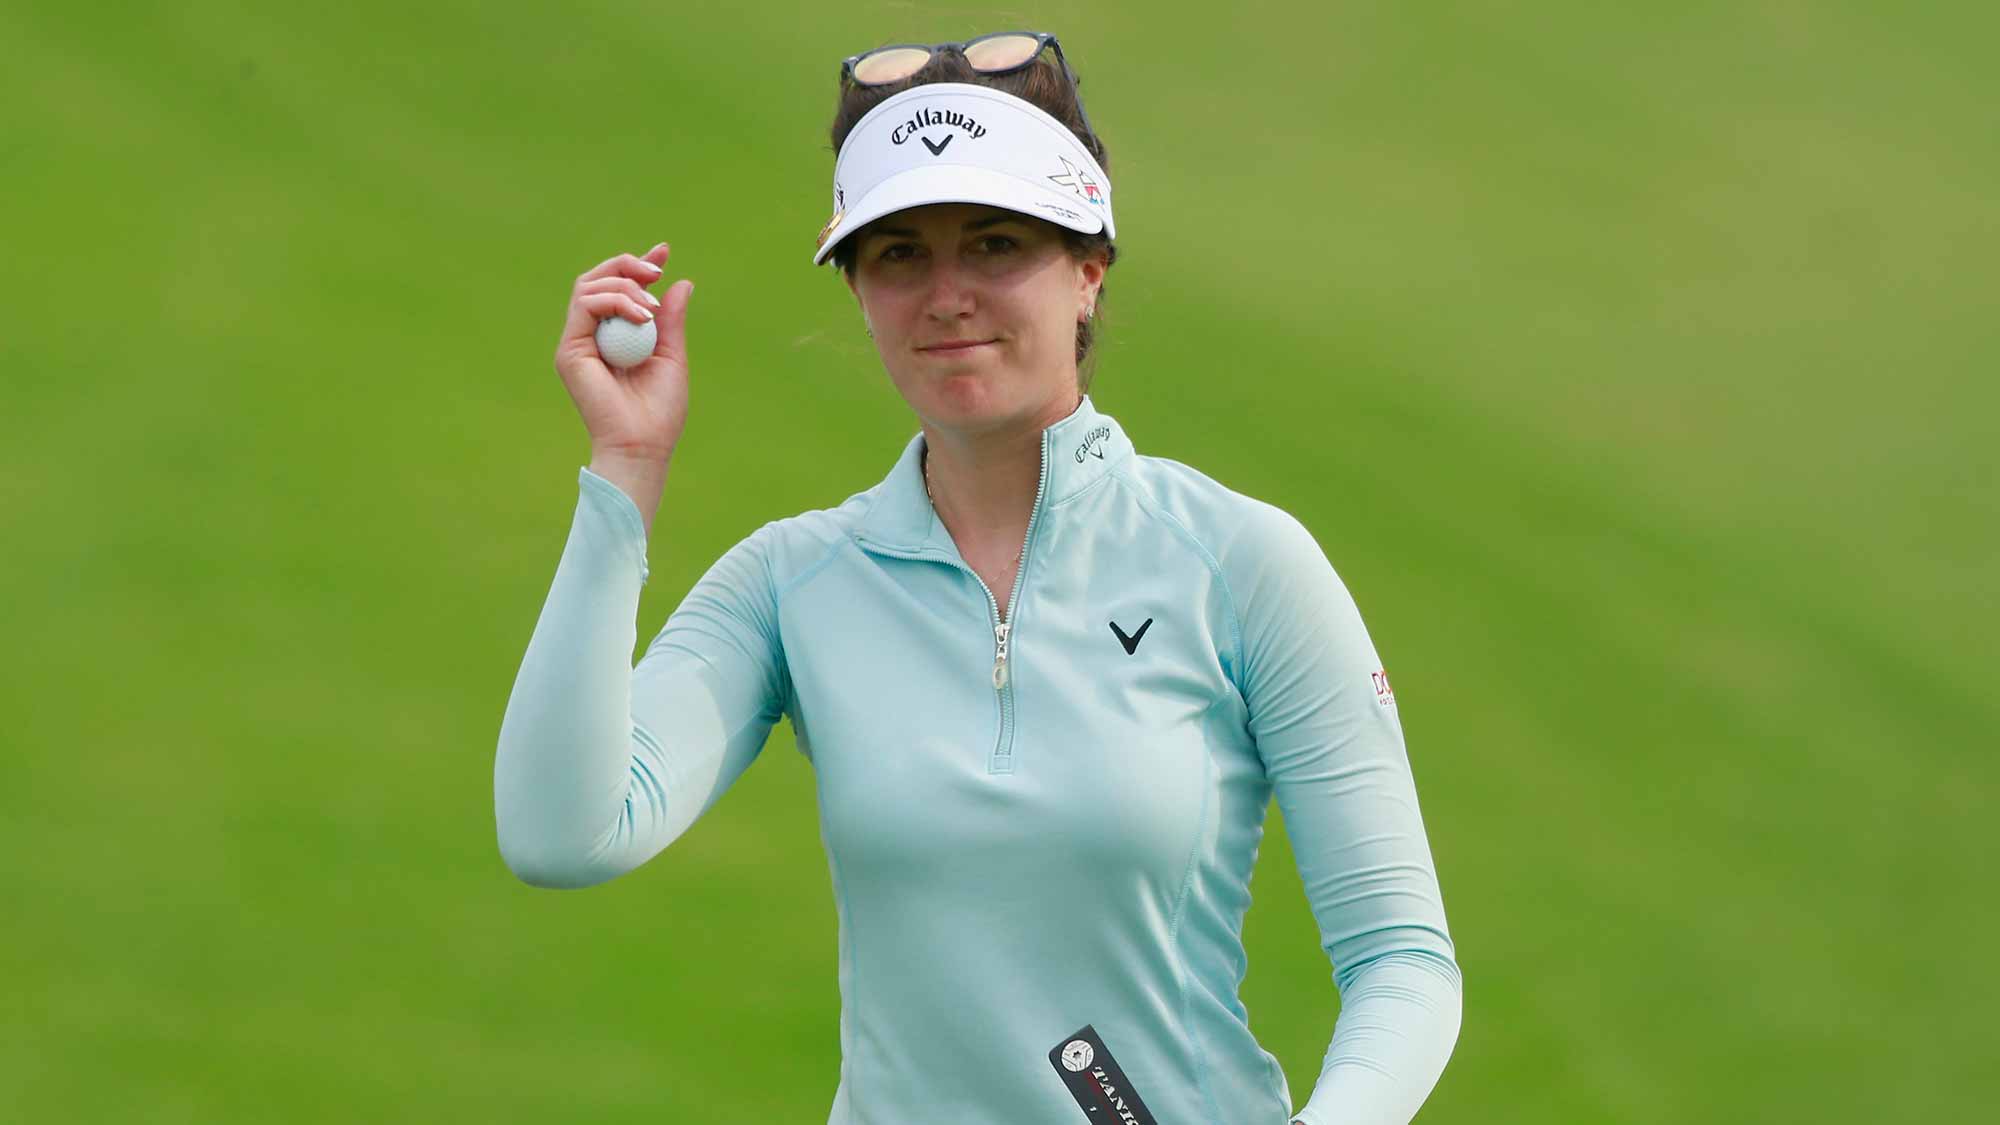 Sandra Gal of Germany reacts at the 18th hole during Round 2 of Blue Bay LPGA